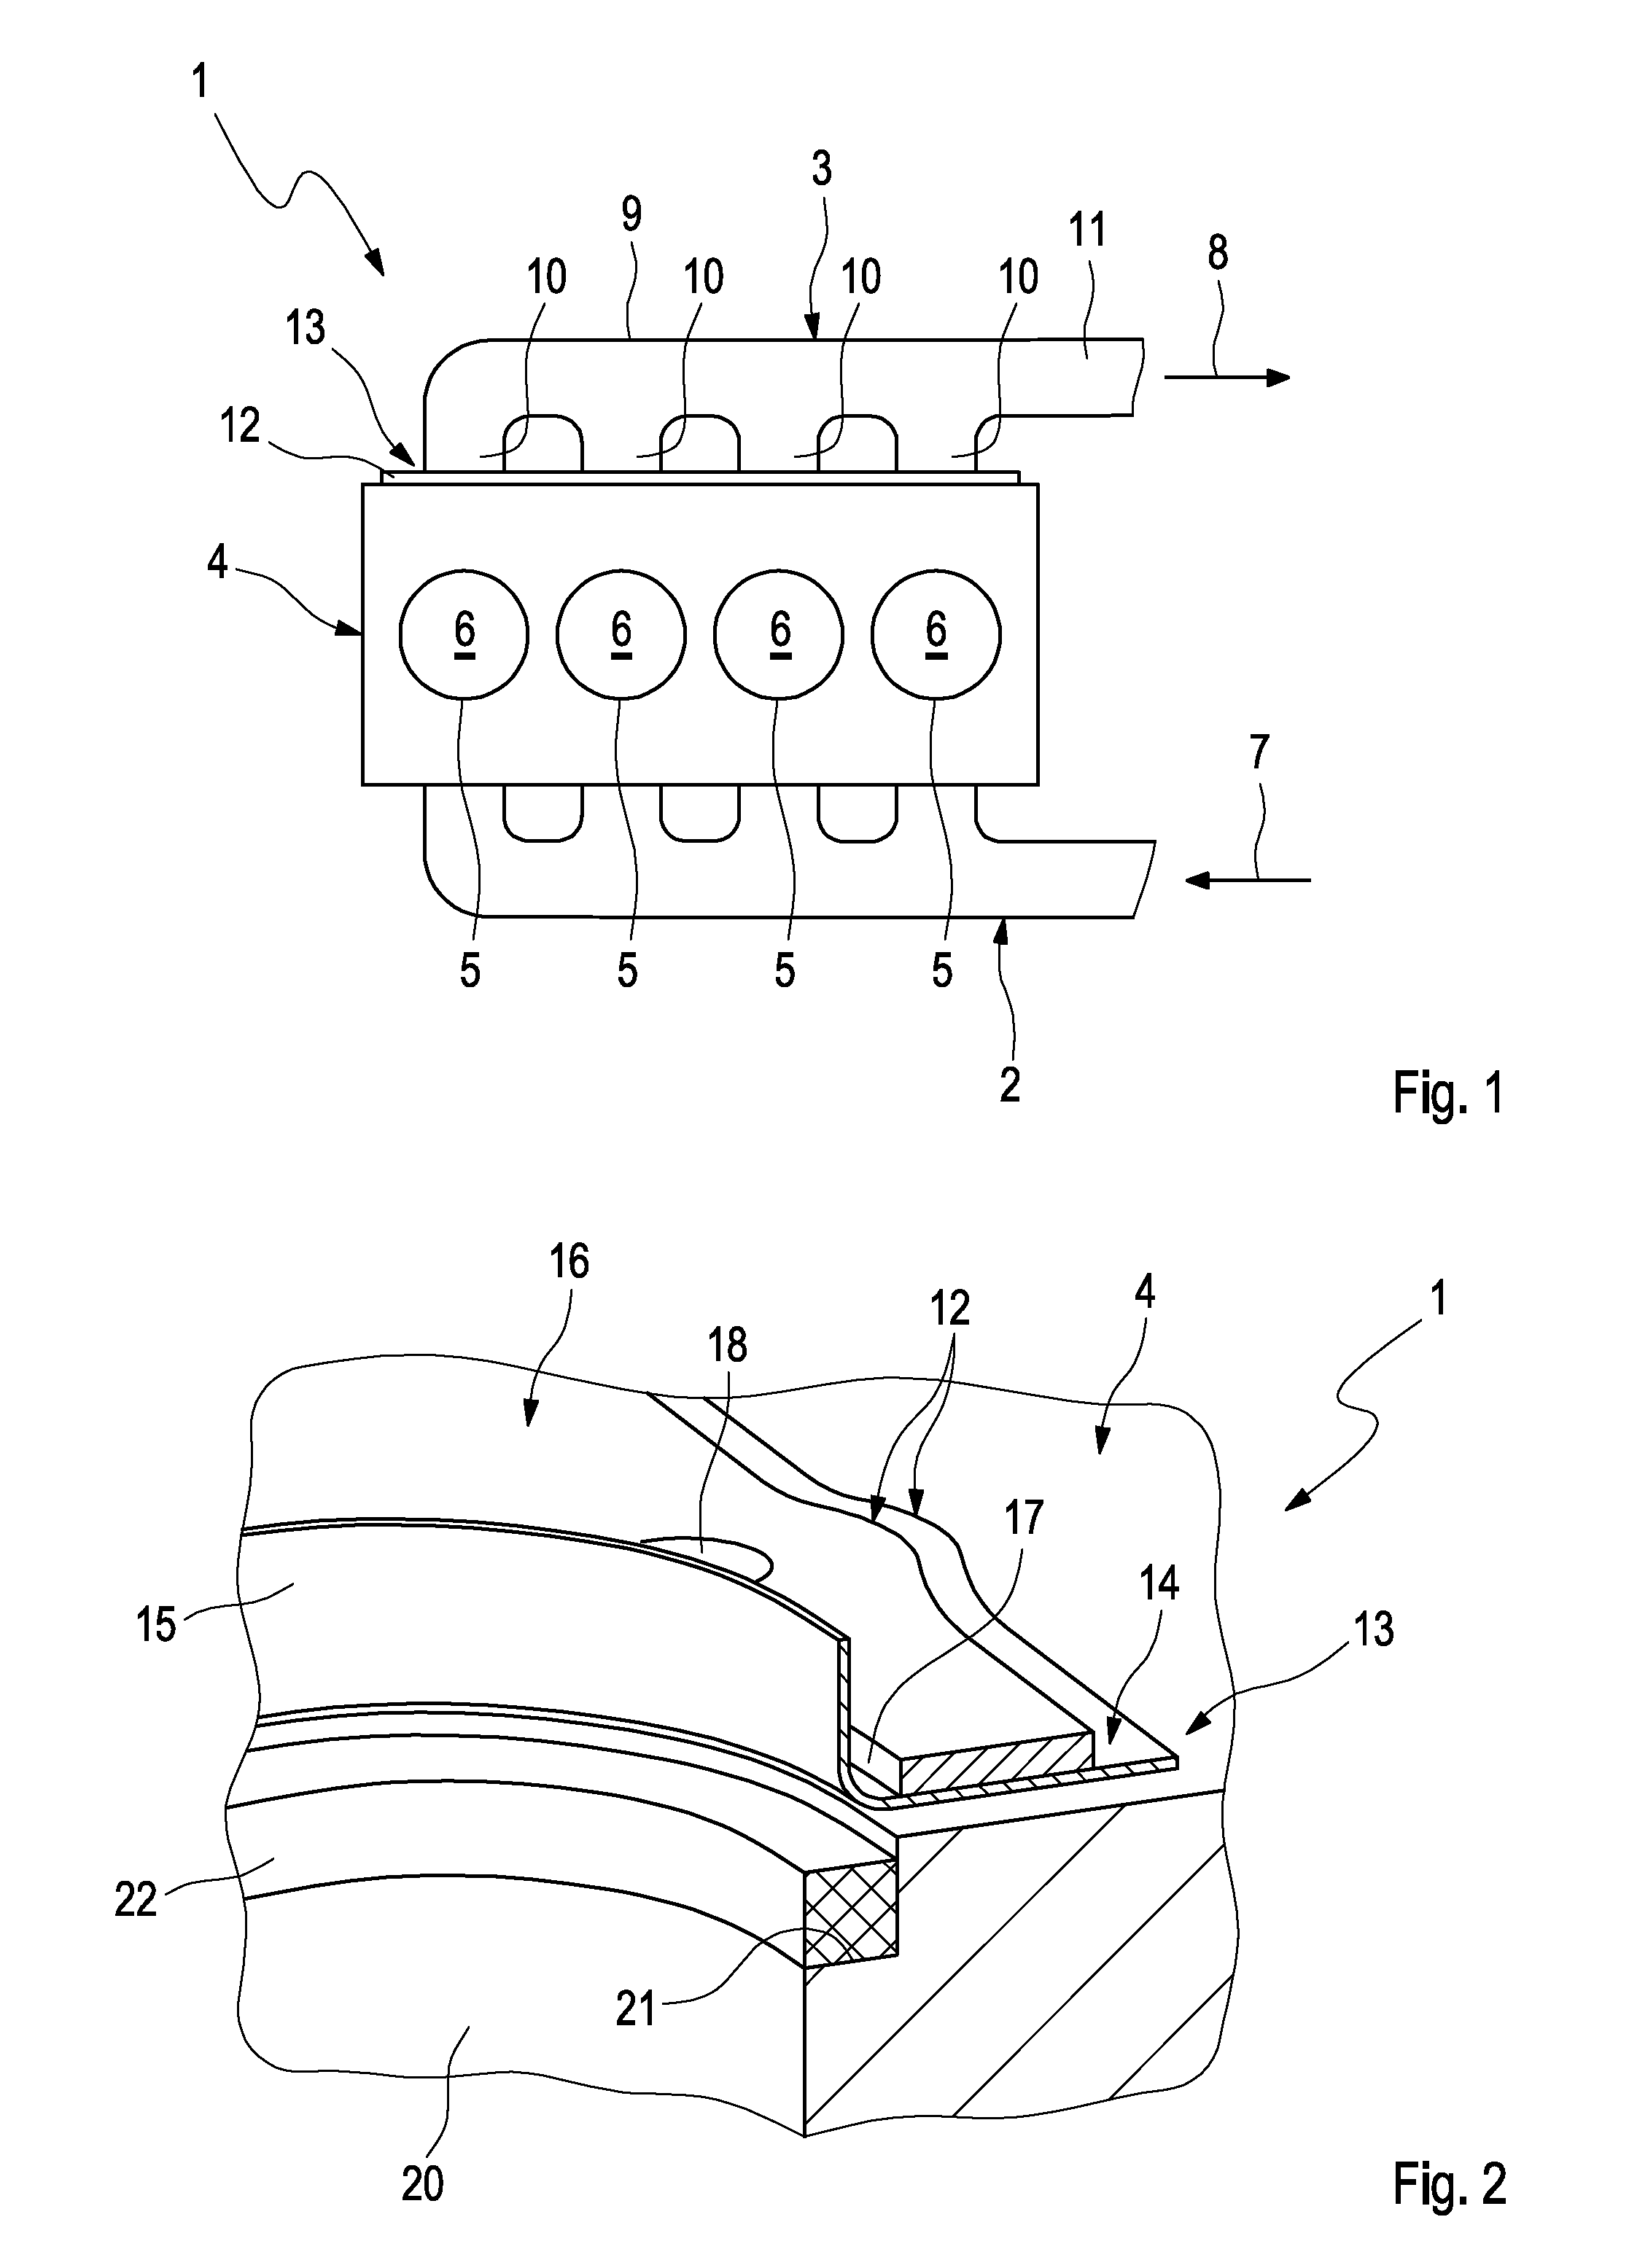 Flange Plate, Flange Connection and Exhaust Manifold